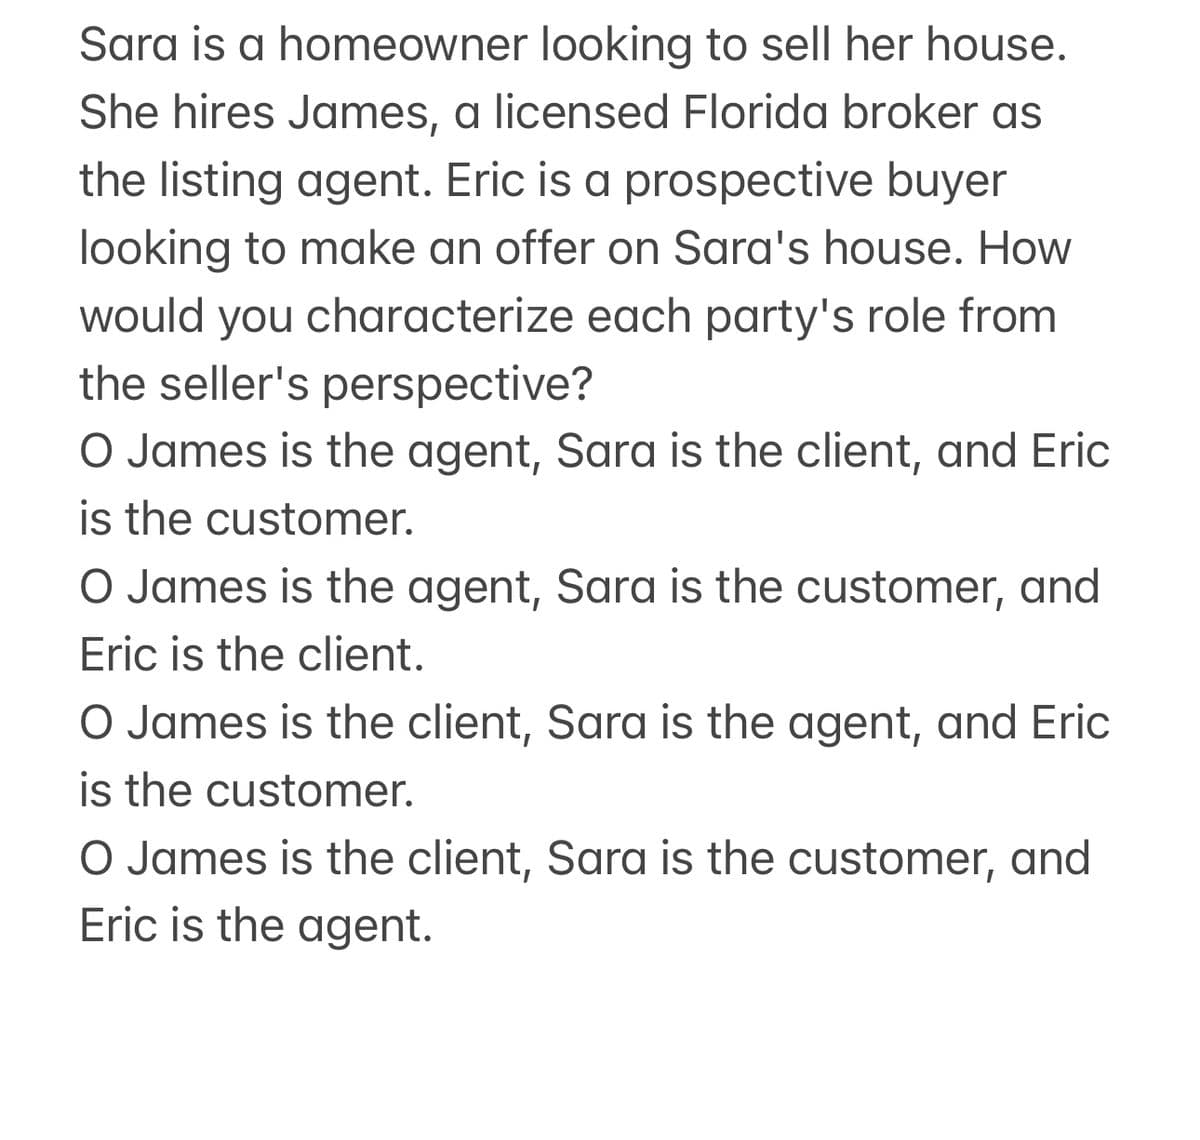 Sara is a homeowner looking to sell her house.
She hires James, a licensed Florida broker as
the listing agent. Eric is a prospective buyer
looking to make an offer on Sara's house. How
would you characterize each party's role from
the seller's perspective?
O James is the agent, Sara is the client, and Eric
is the customer.
O James is the agent, Sara is the customer, and
Eric is the client.
O James is the client, Sara is the agent, and Eric
is the customer.
O James is the client, Sara is the customer, and
Eric is the agent.